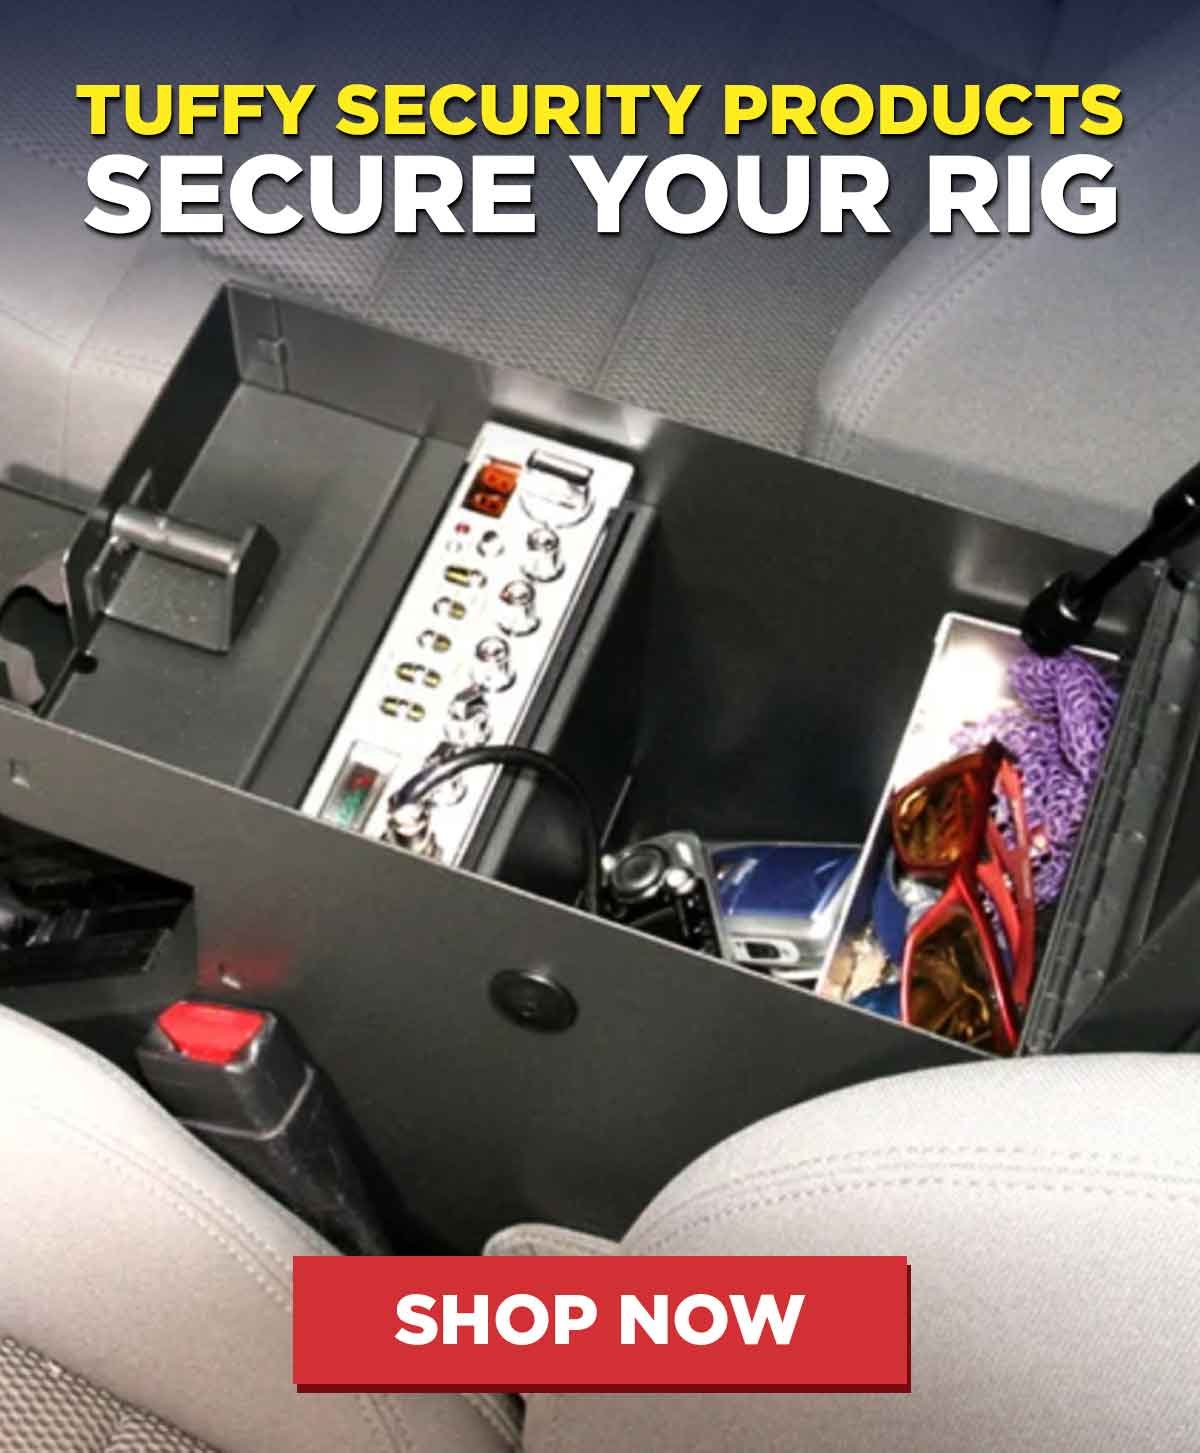 Tuffy Security Products Secure Your Rig